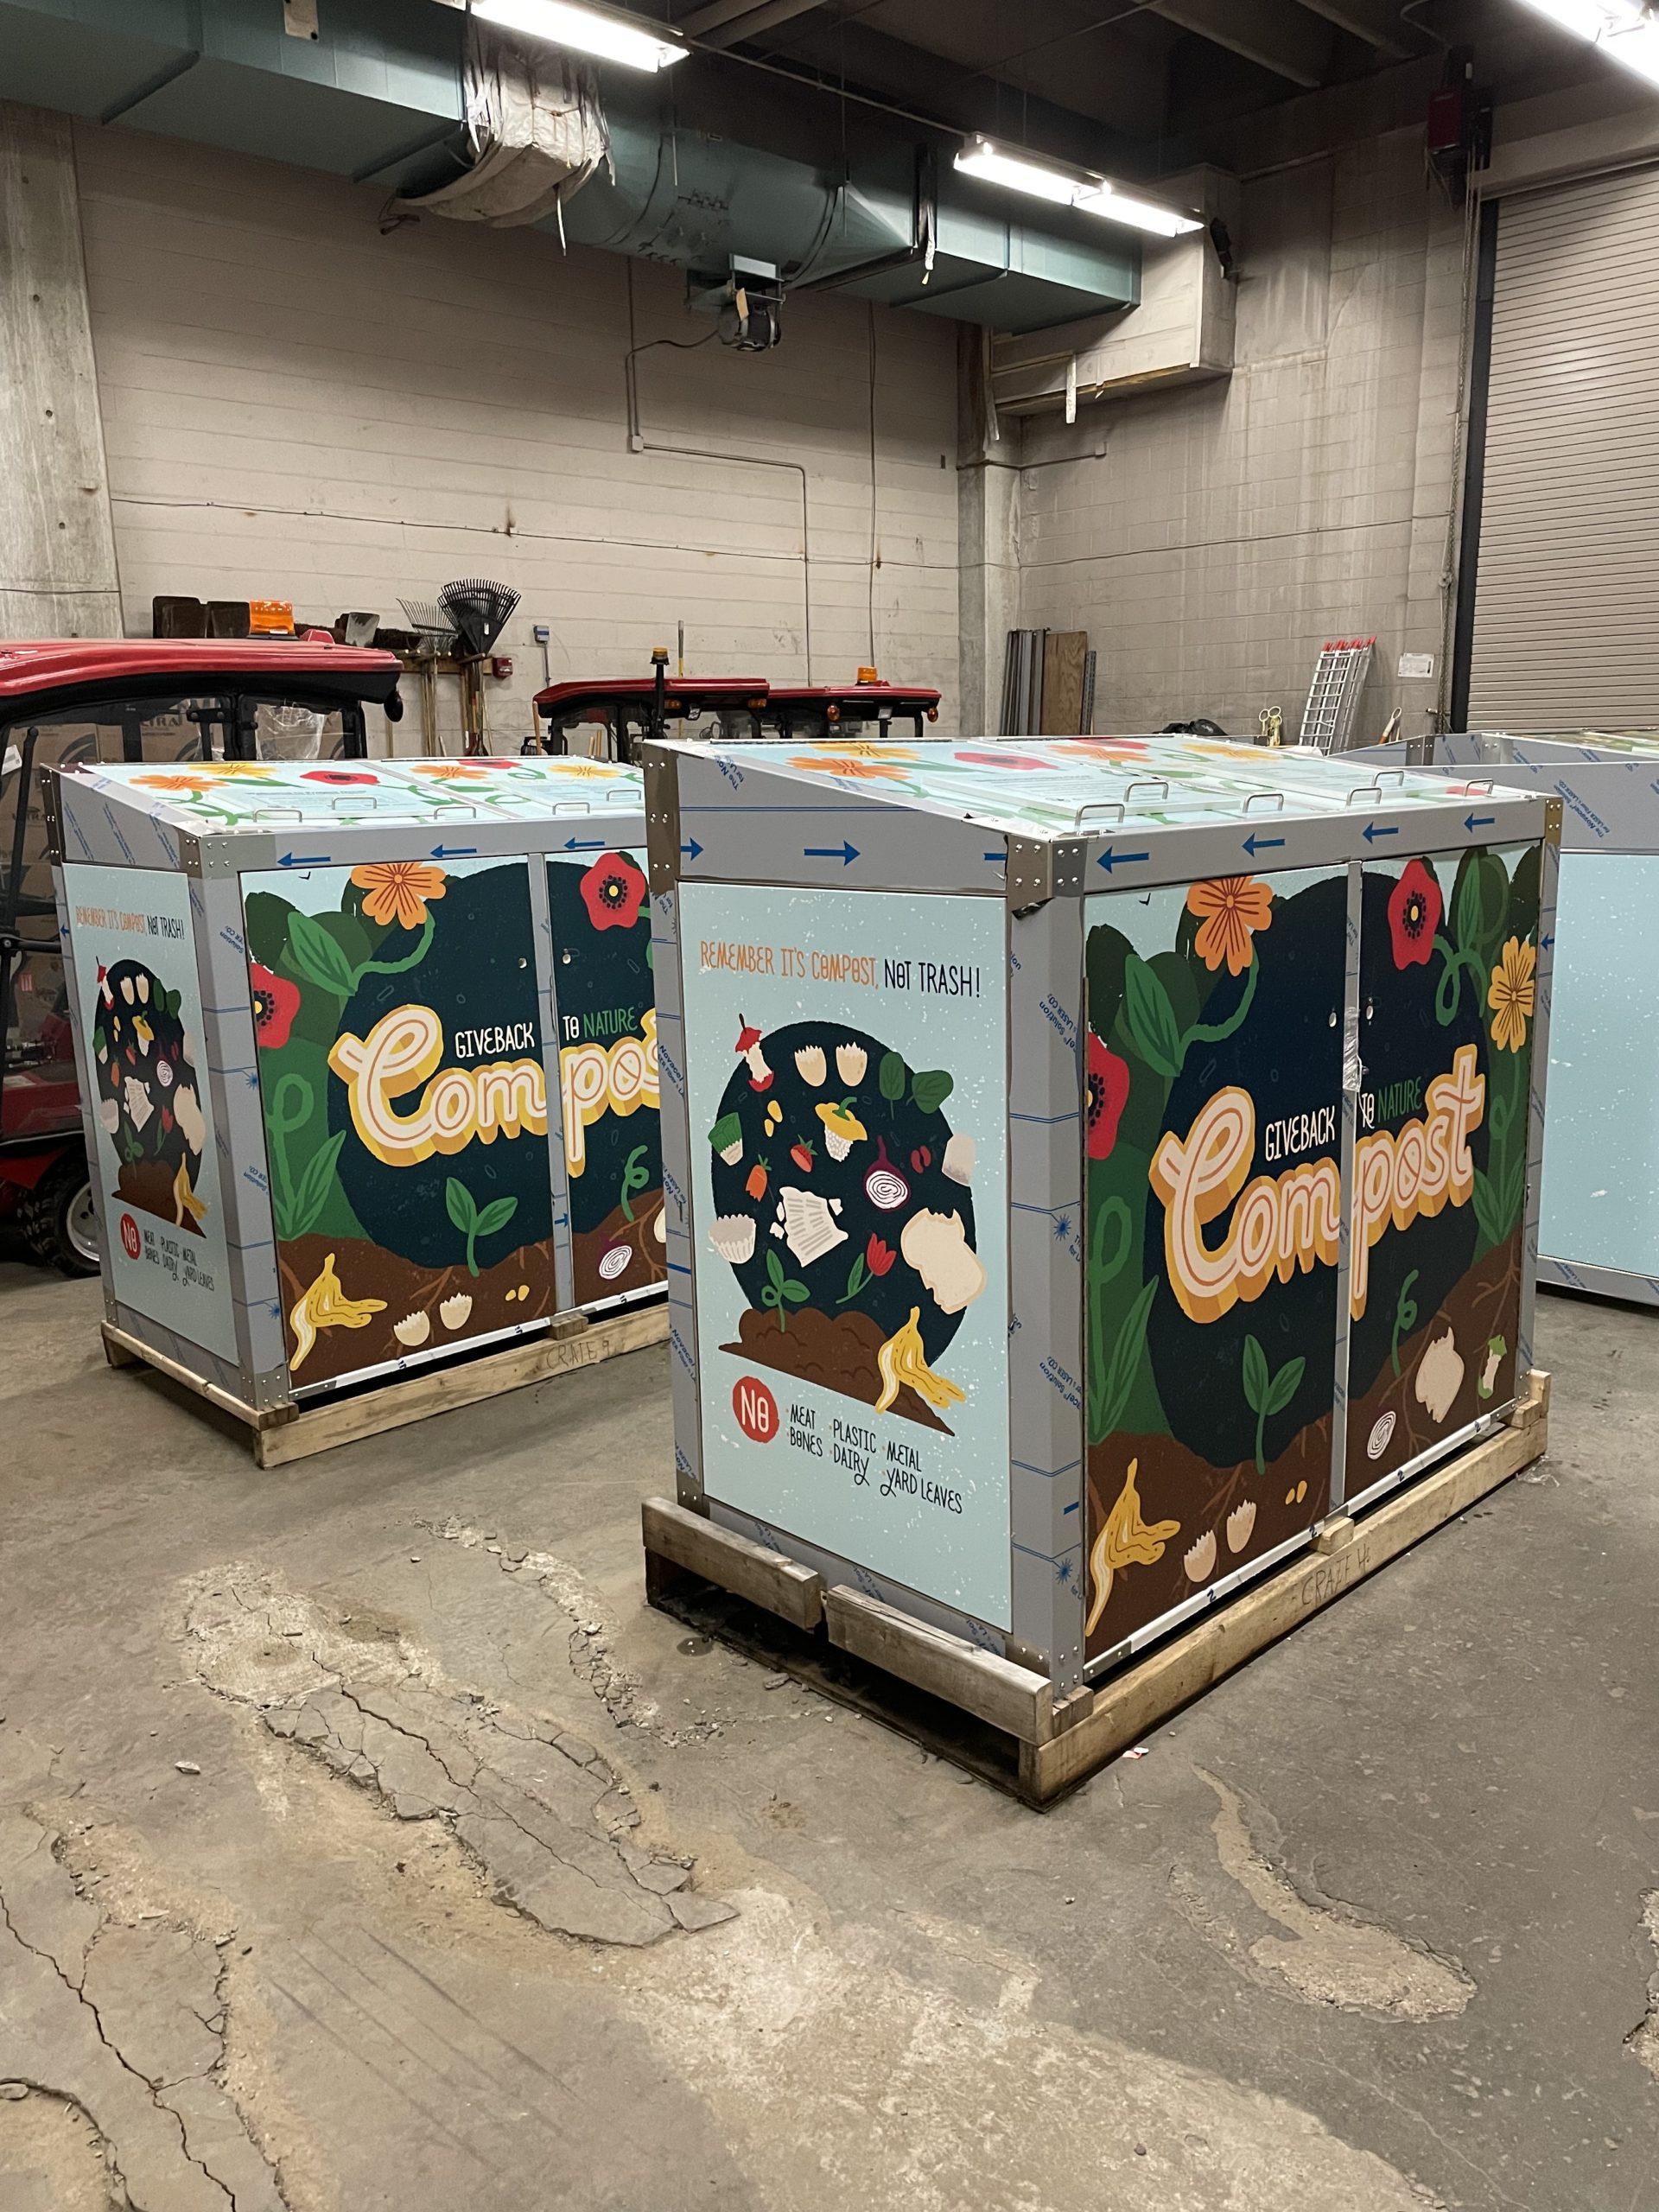 Fenway Group worked alongside Boston public works and some local artists to create compost bin wraps as a part of Project Oscar.